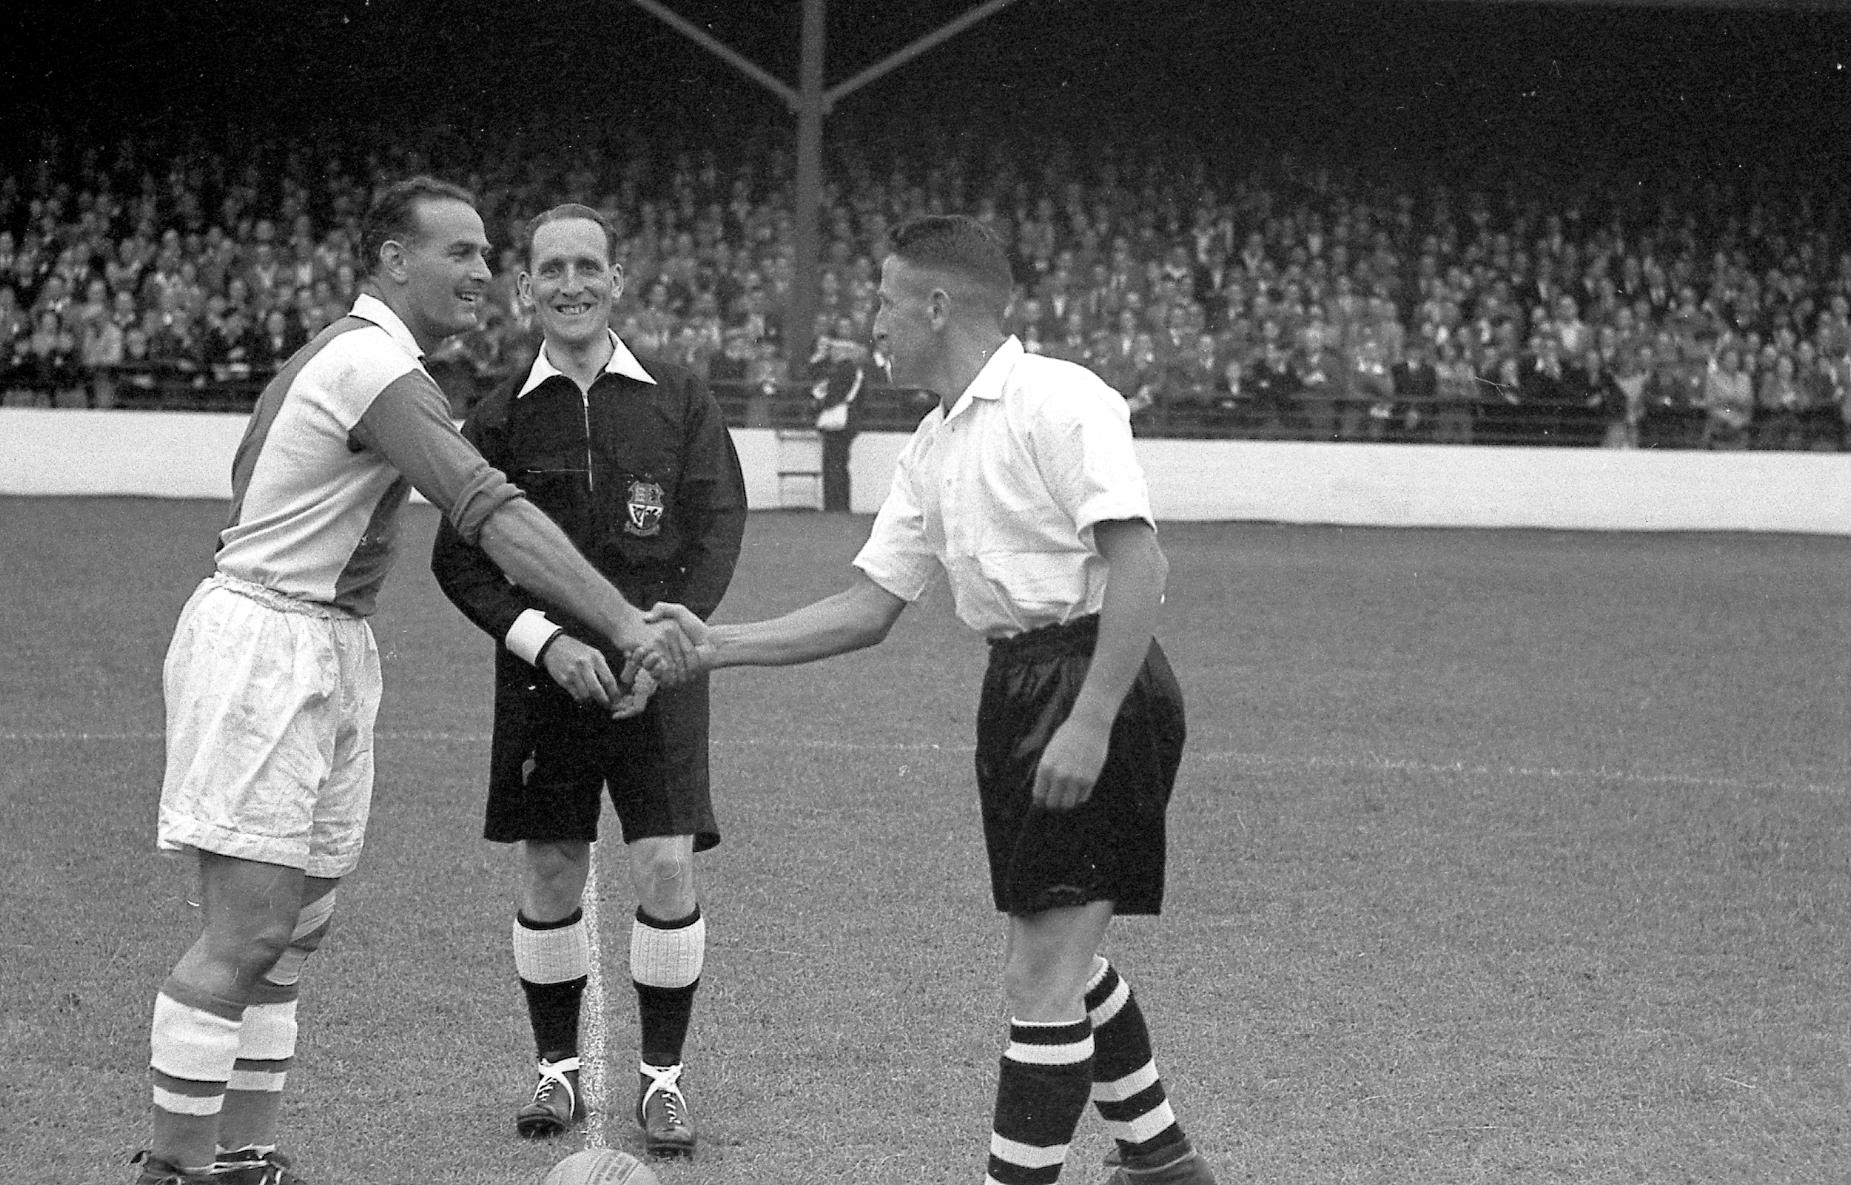 Bud Aherne greets Oldham skipper George Hardwick. The referee,, a smiling Mr Richardson, watches on